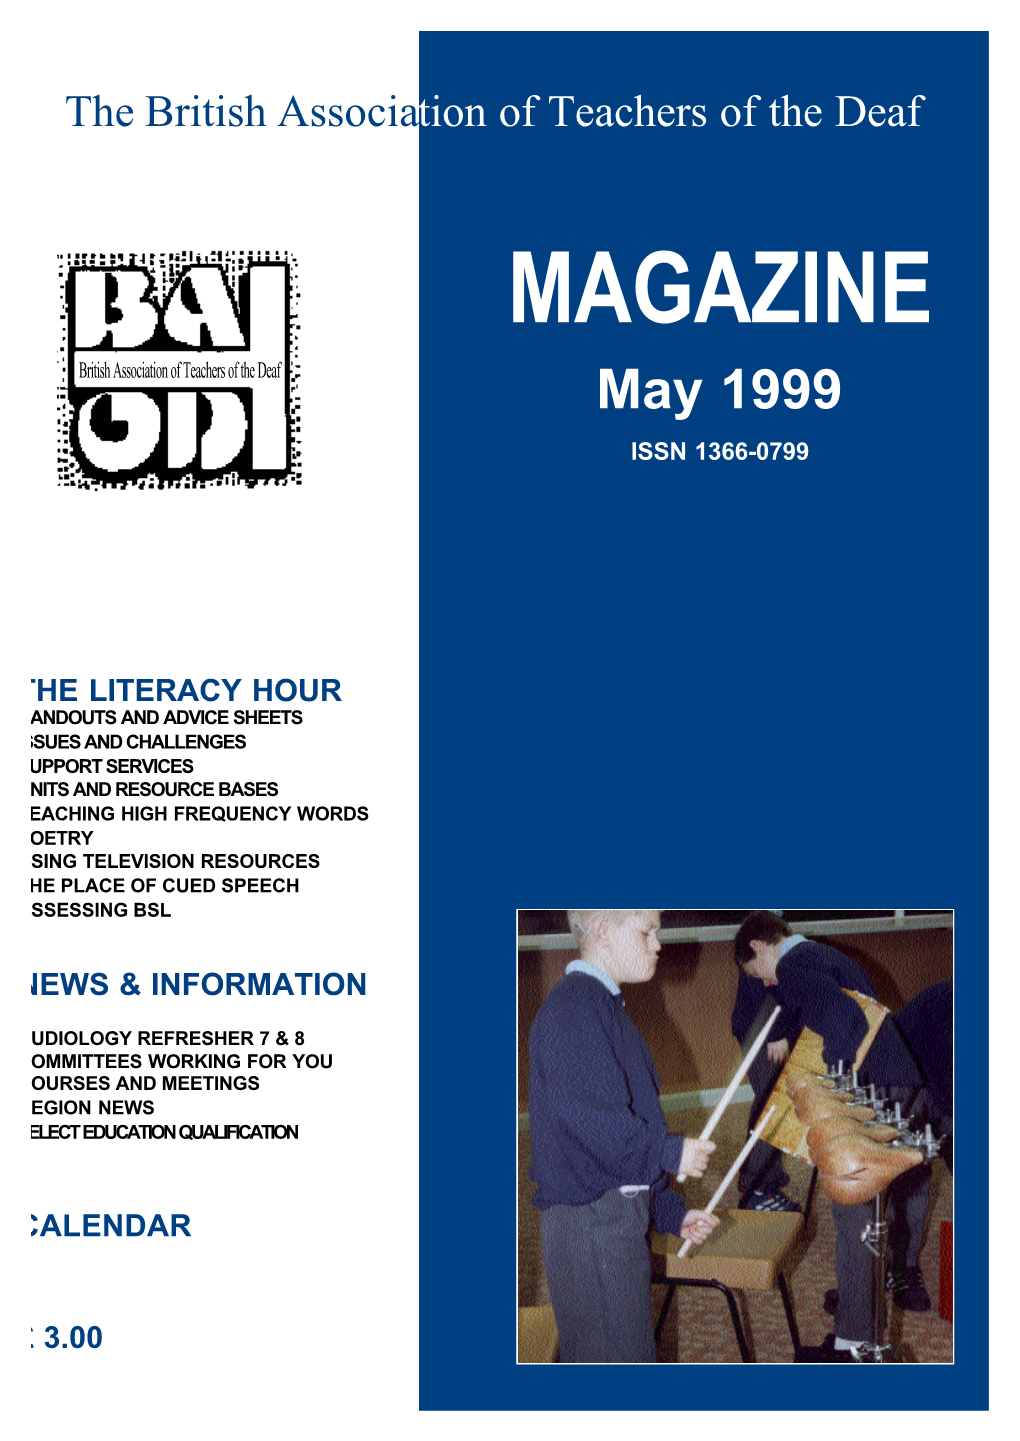 MAGAZINE British Association of Teachers of the Deaf May 1999 ISSN 1366-0799